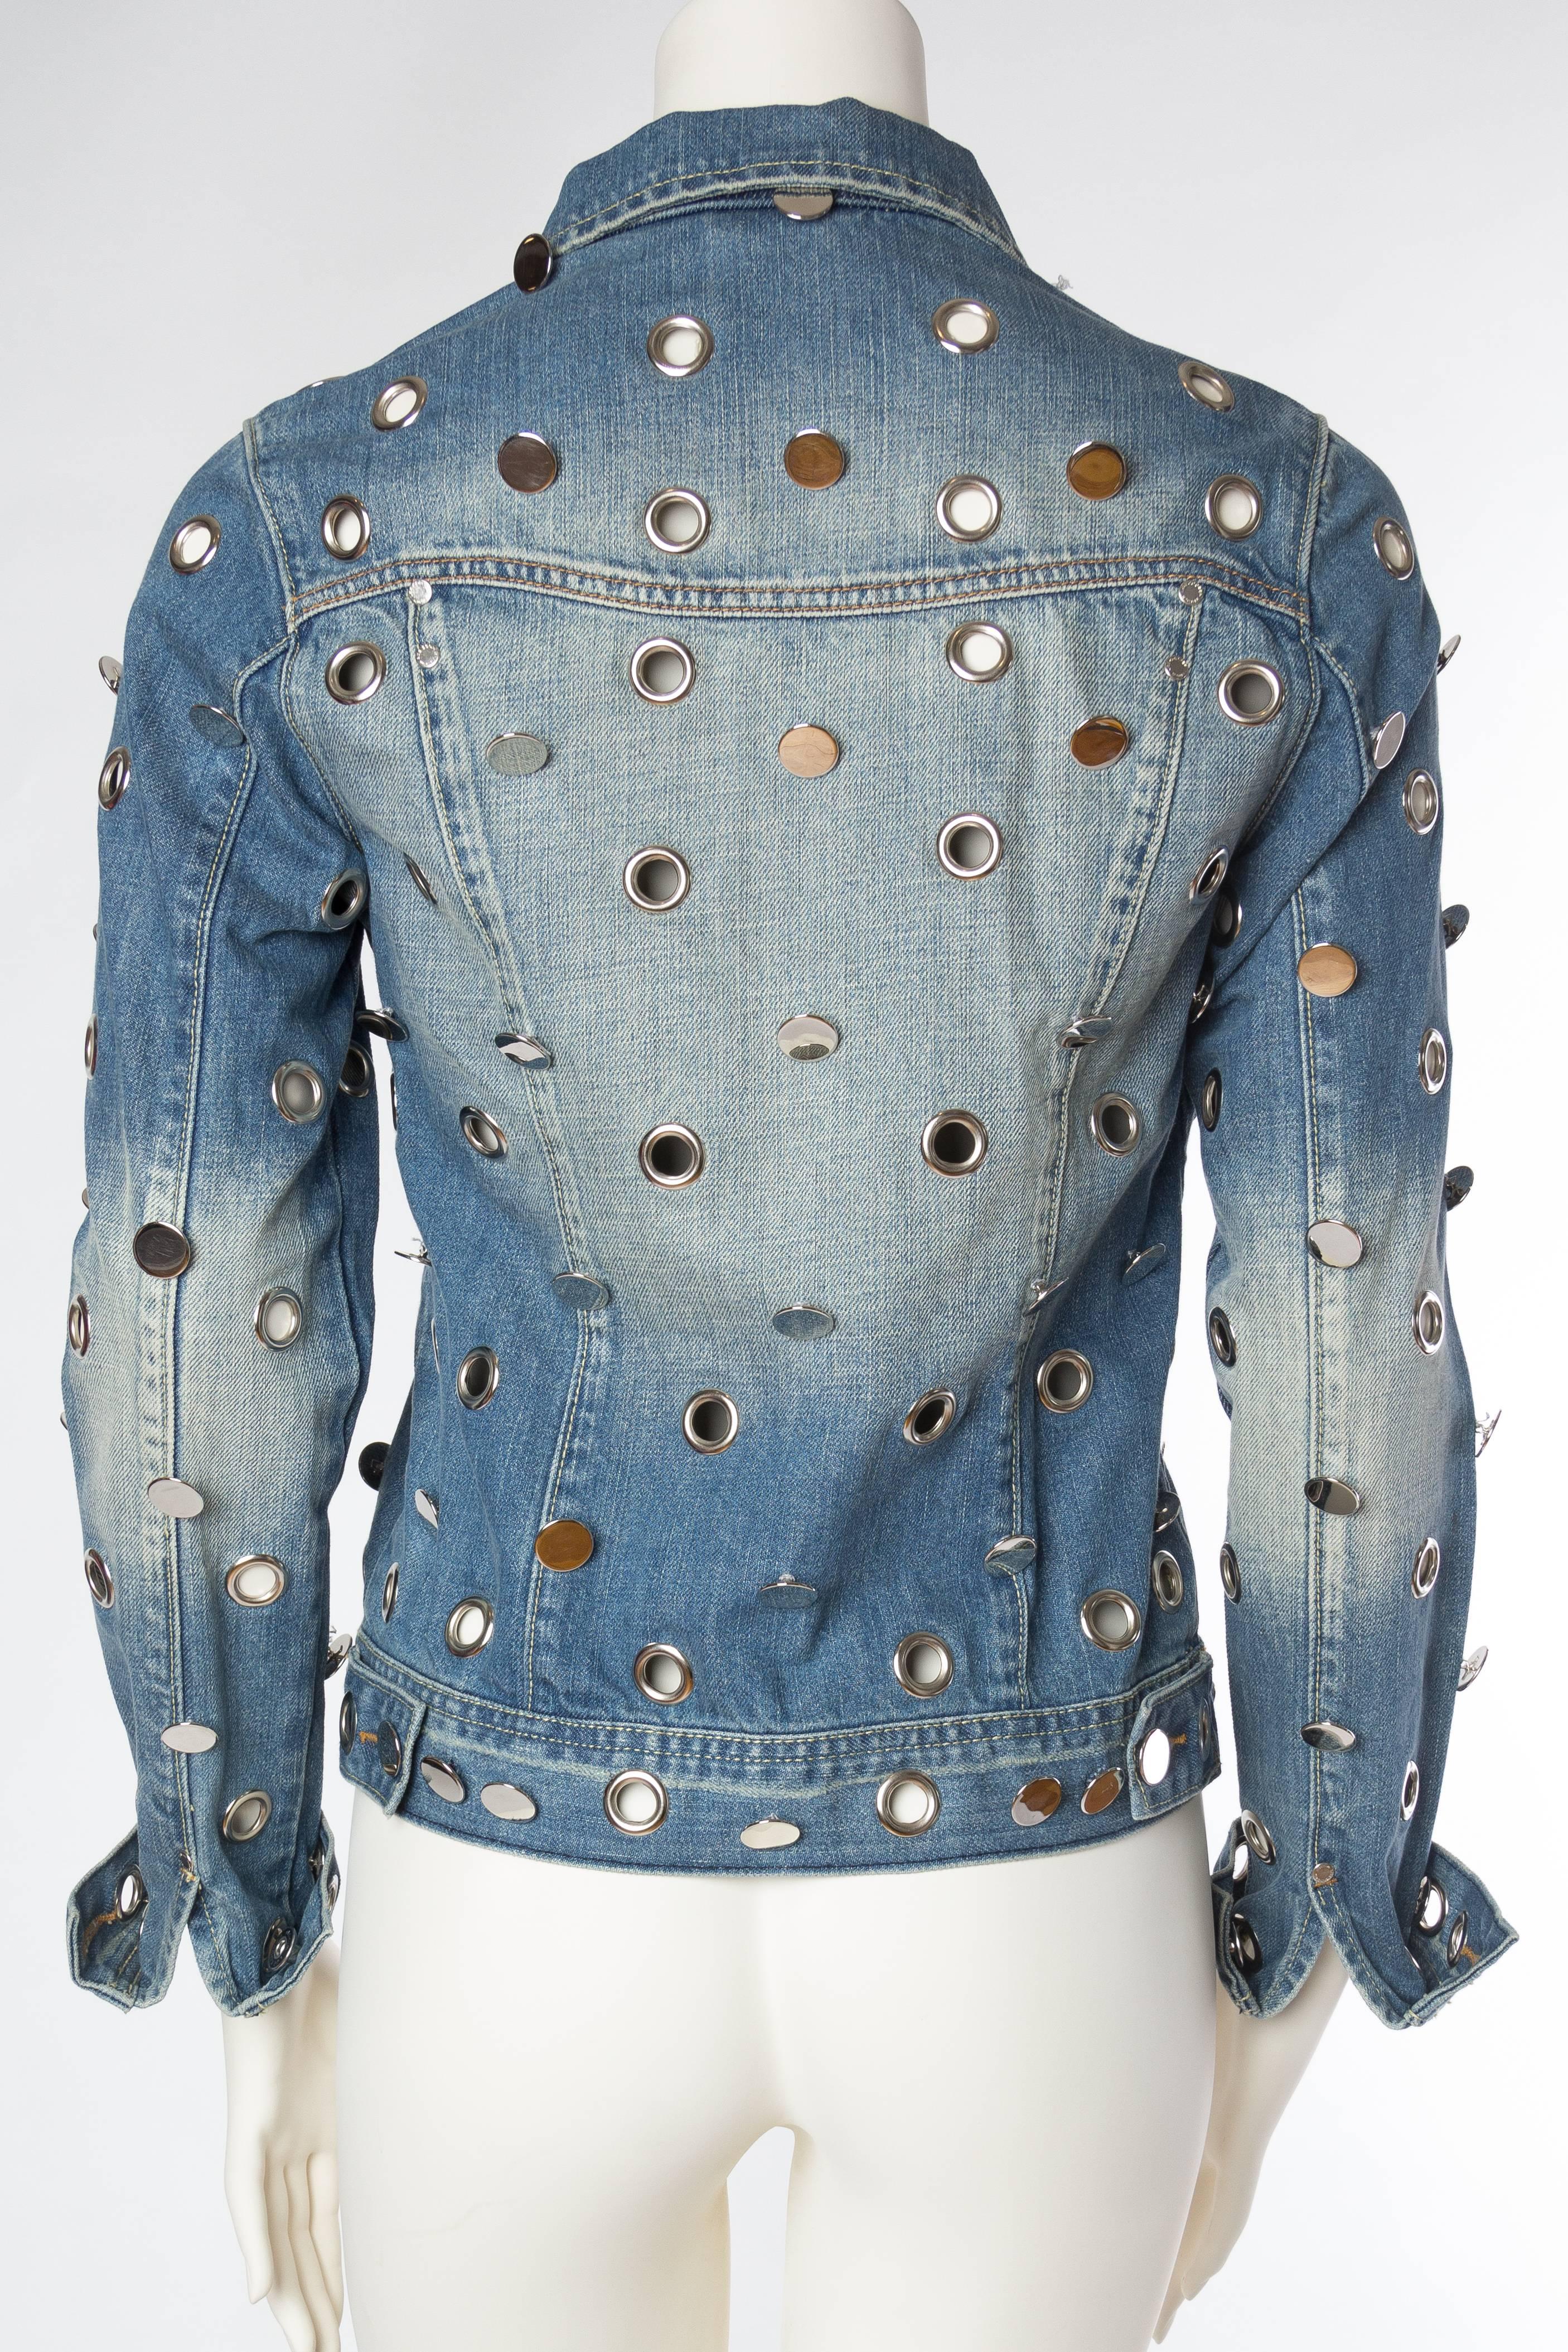 Denim Jacket Covered in Mirrored Buttons and Gromets 1